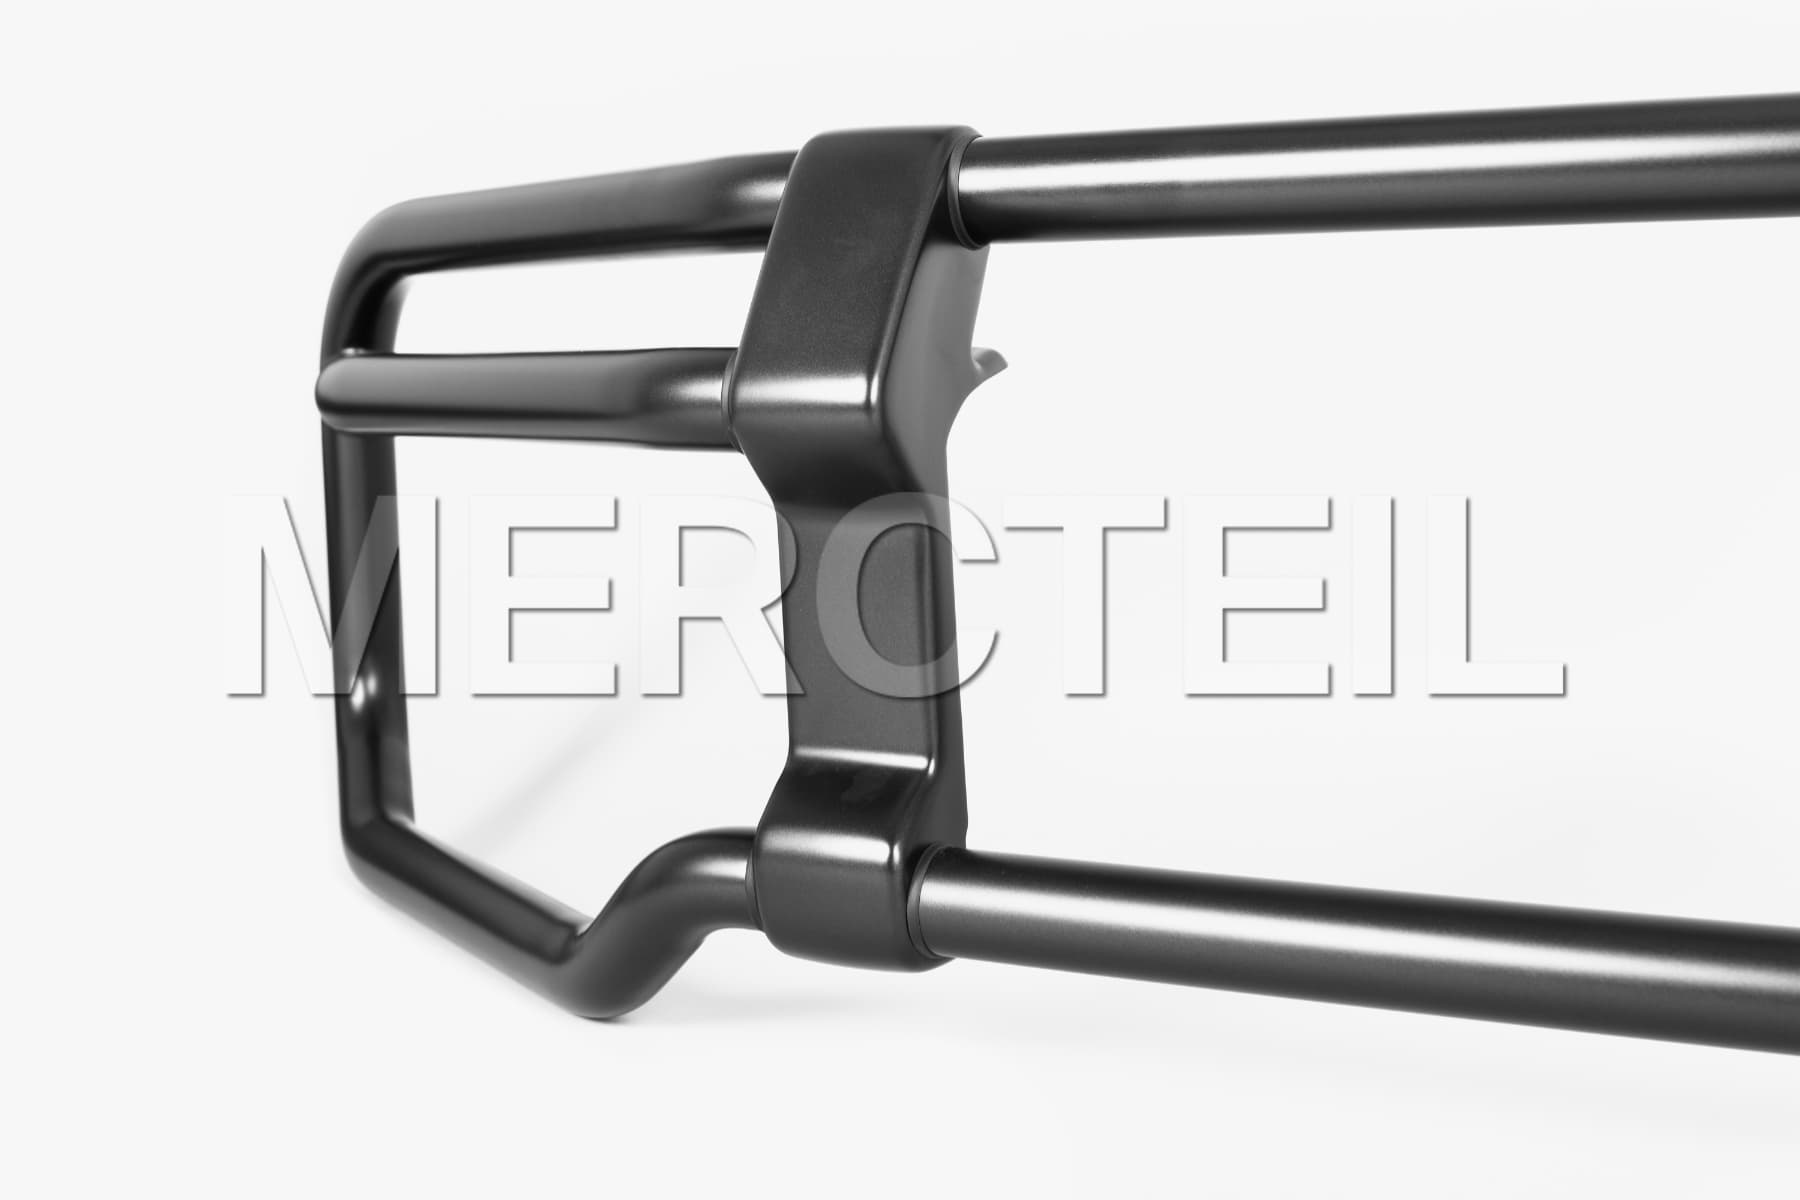 G63 AMG Guard Bullbar Painted in Black Matte W463A Genuine Mercedes AMG (part number: A4638806803)